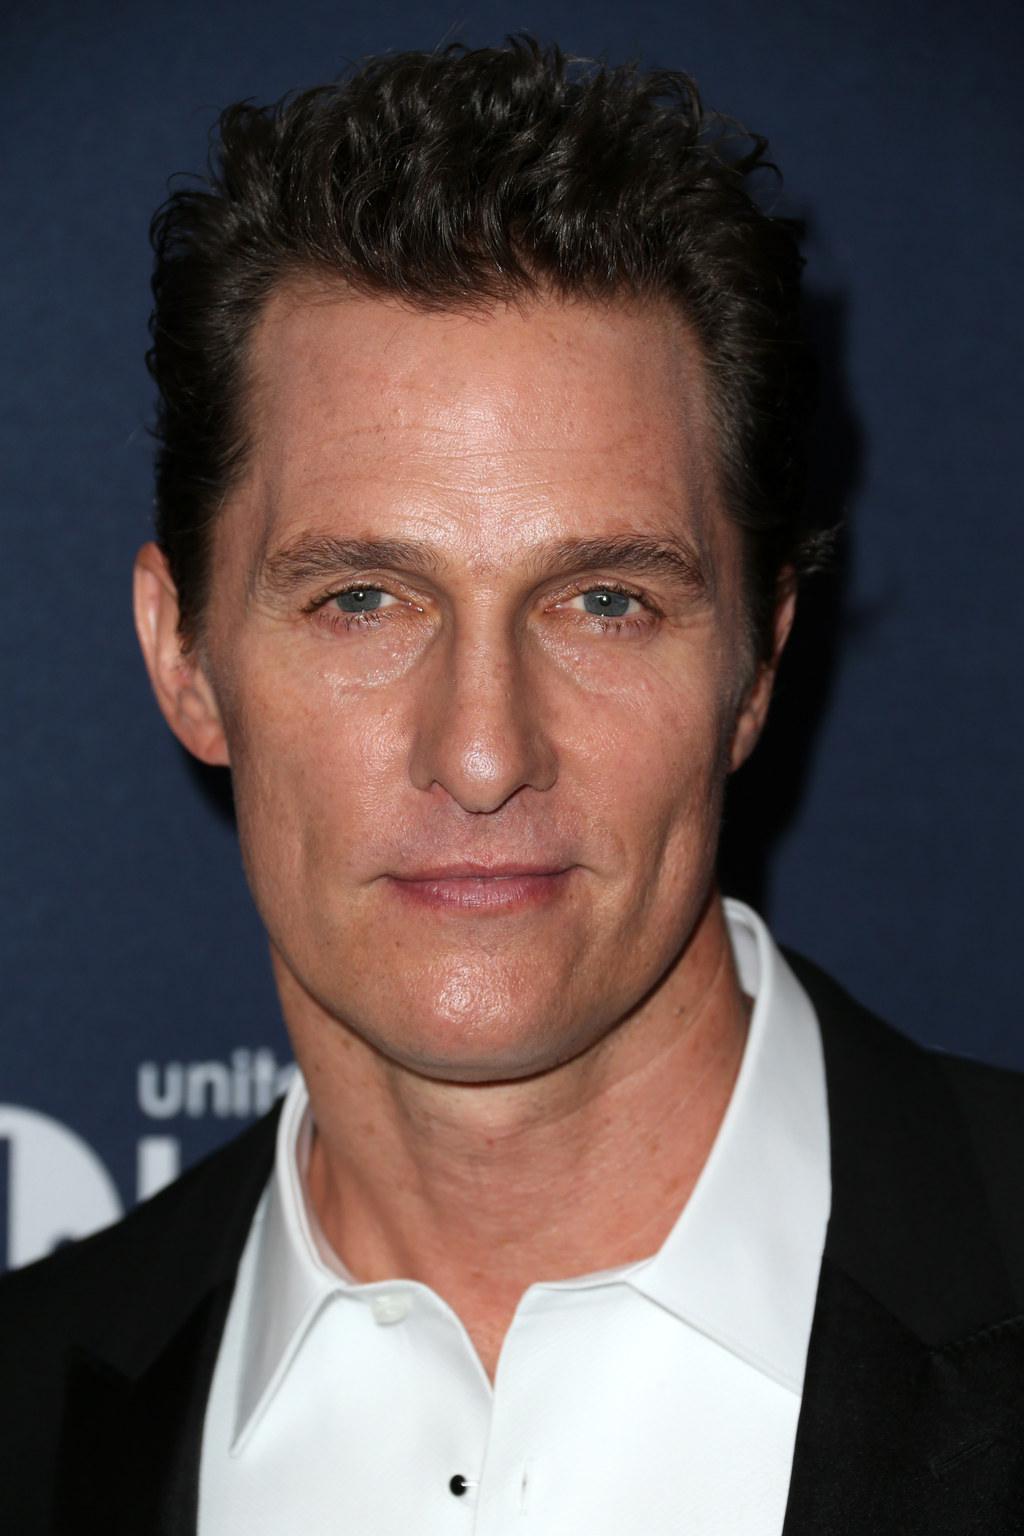 Matthew McConaughey And Idris Elba Are Set To Star In Stephen King's ...